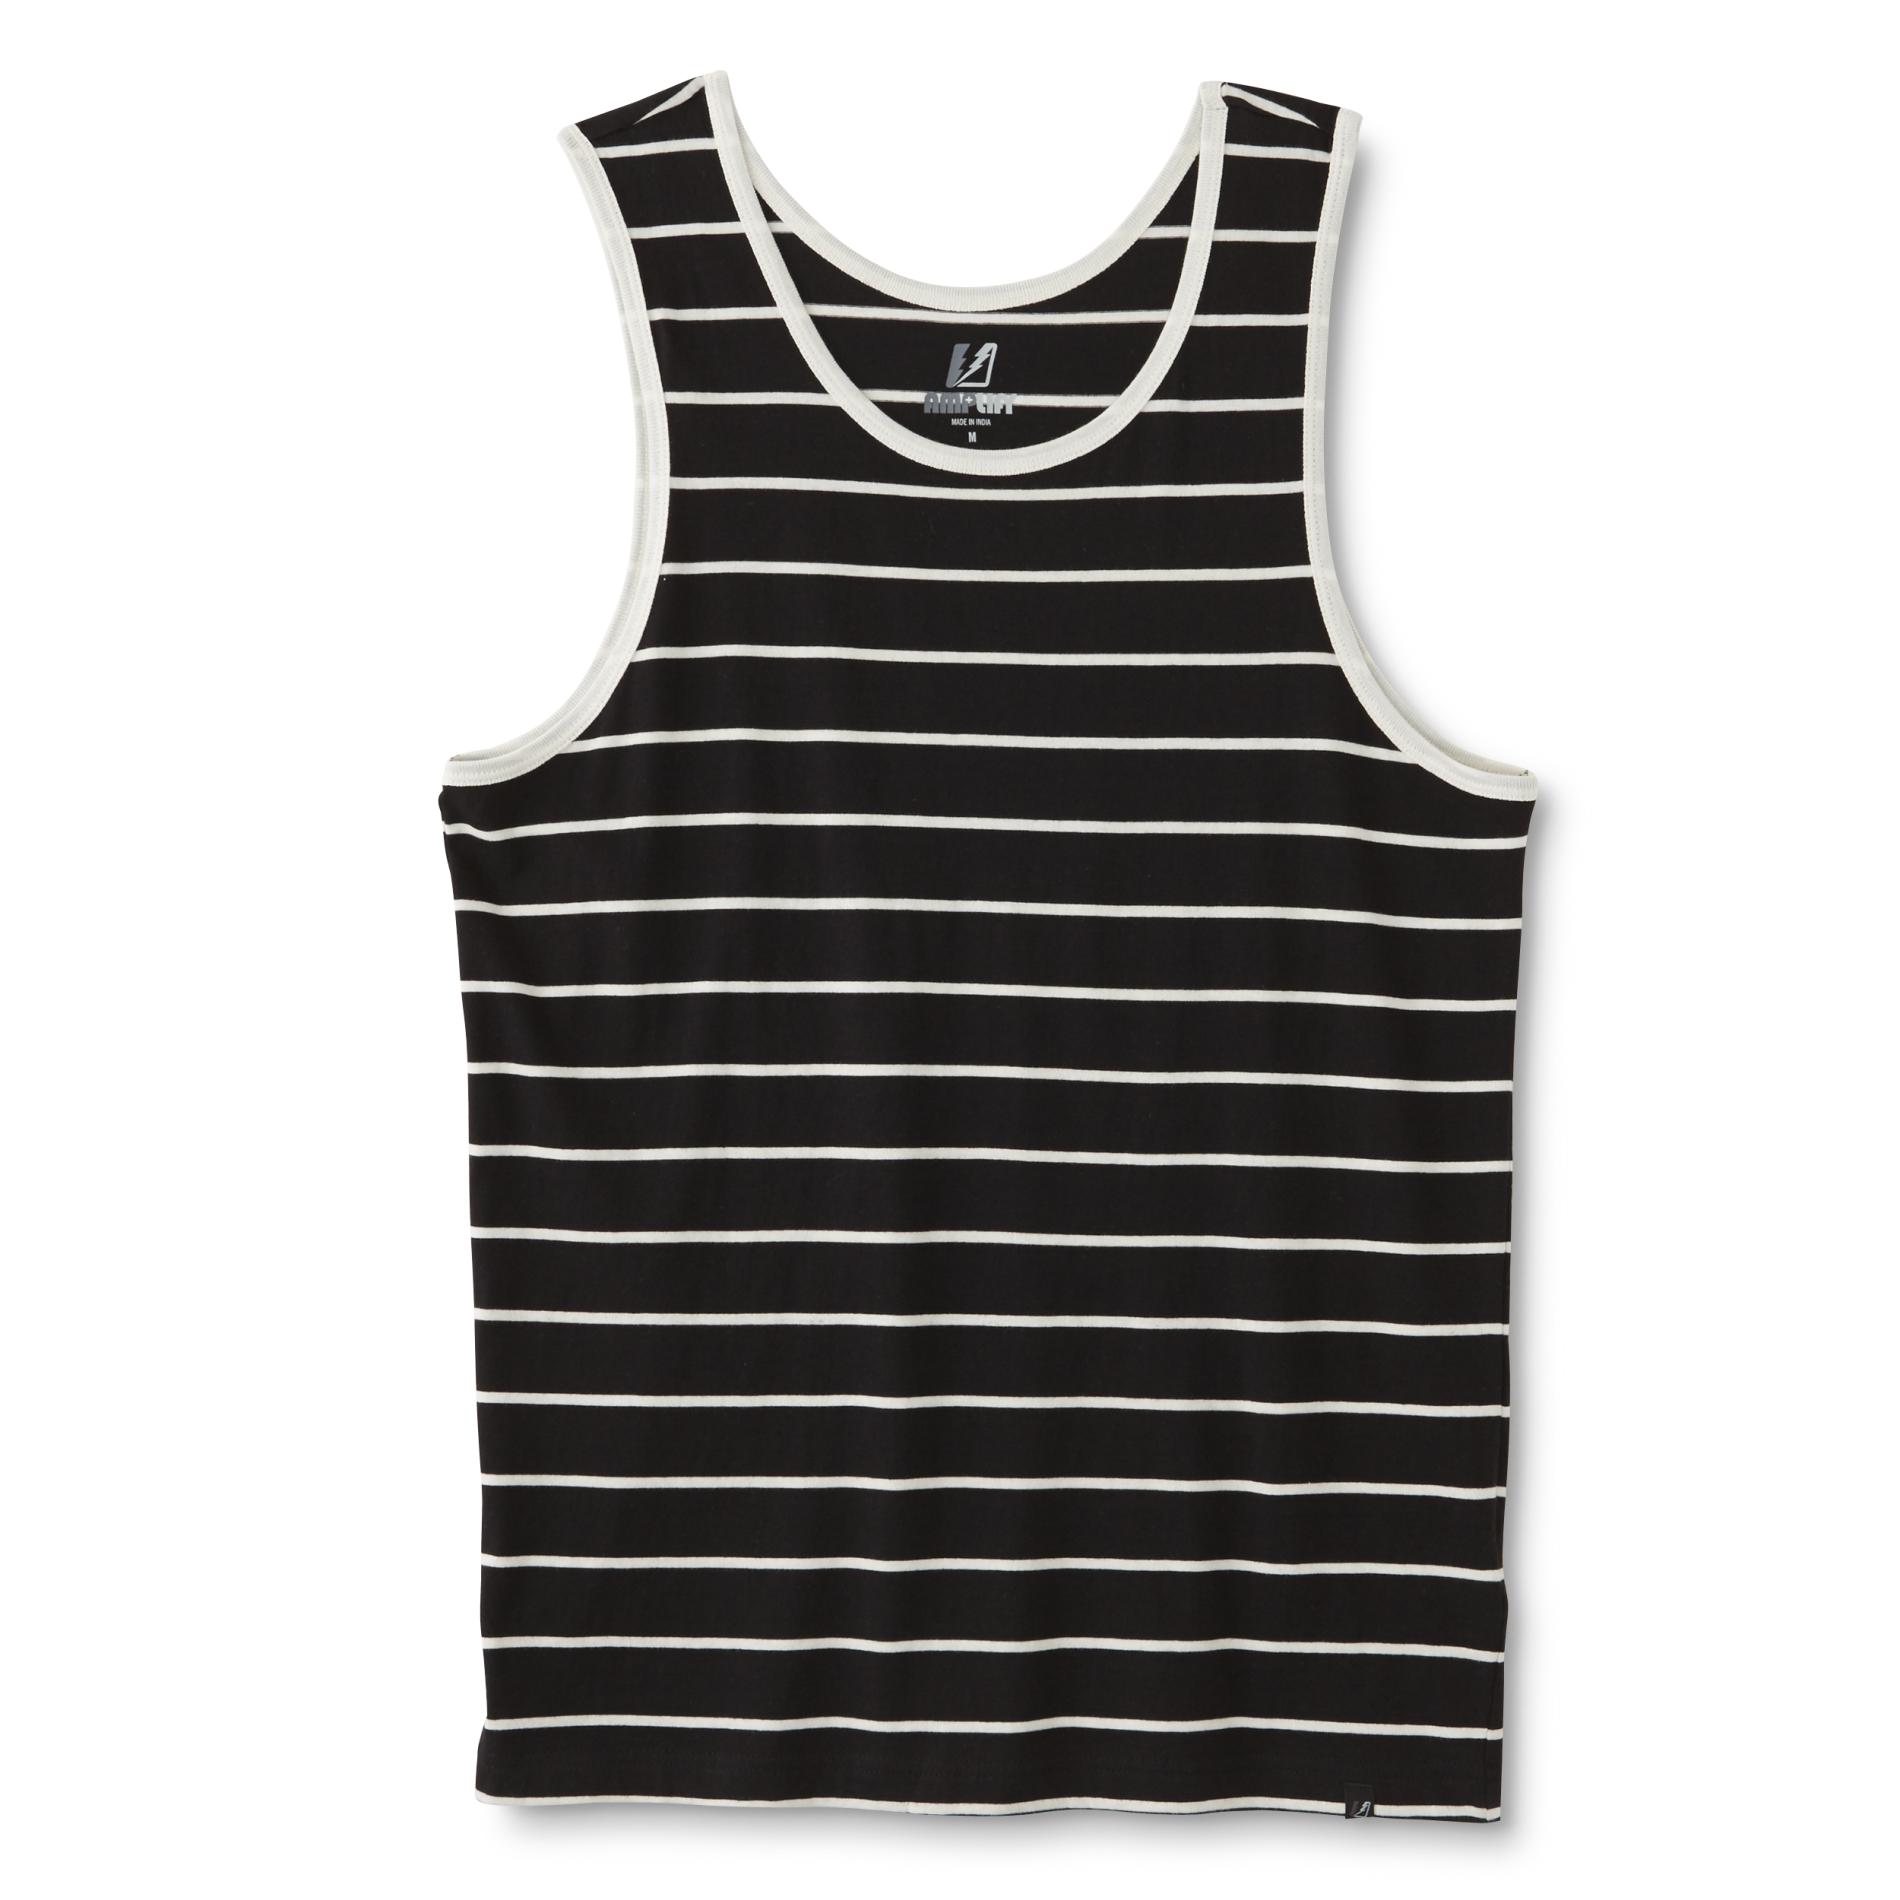 Young Men's Muscle T-Shirt - Striped